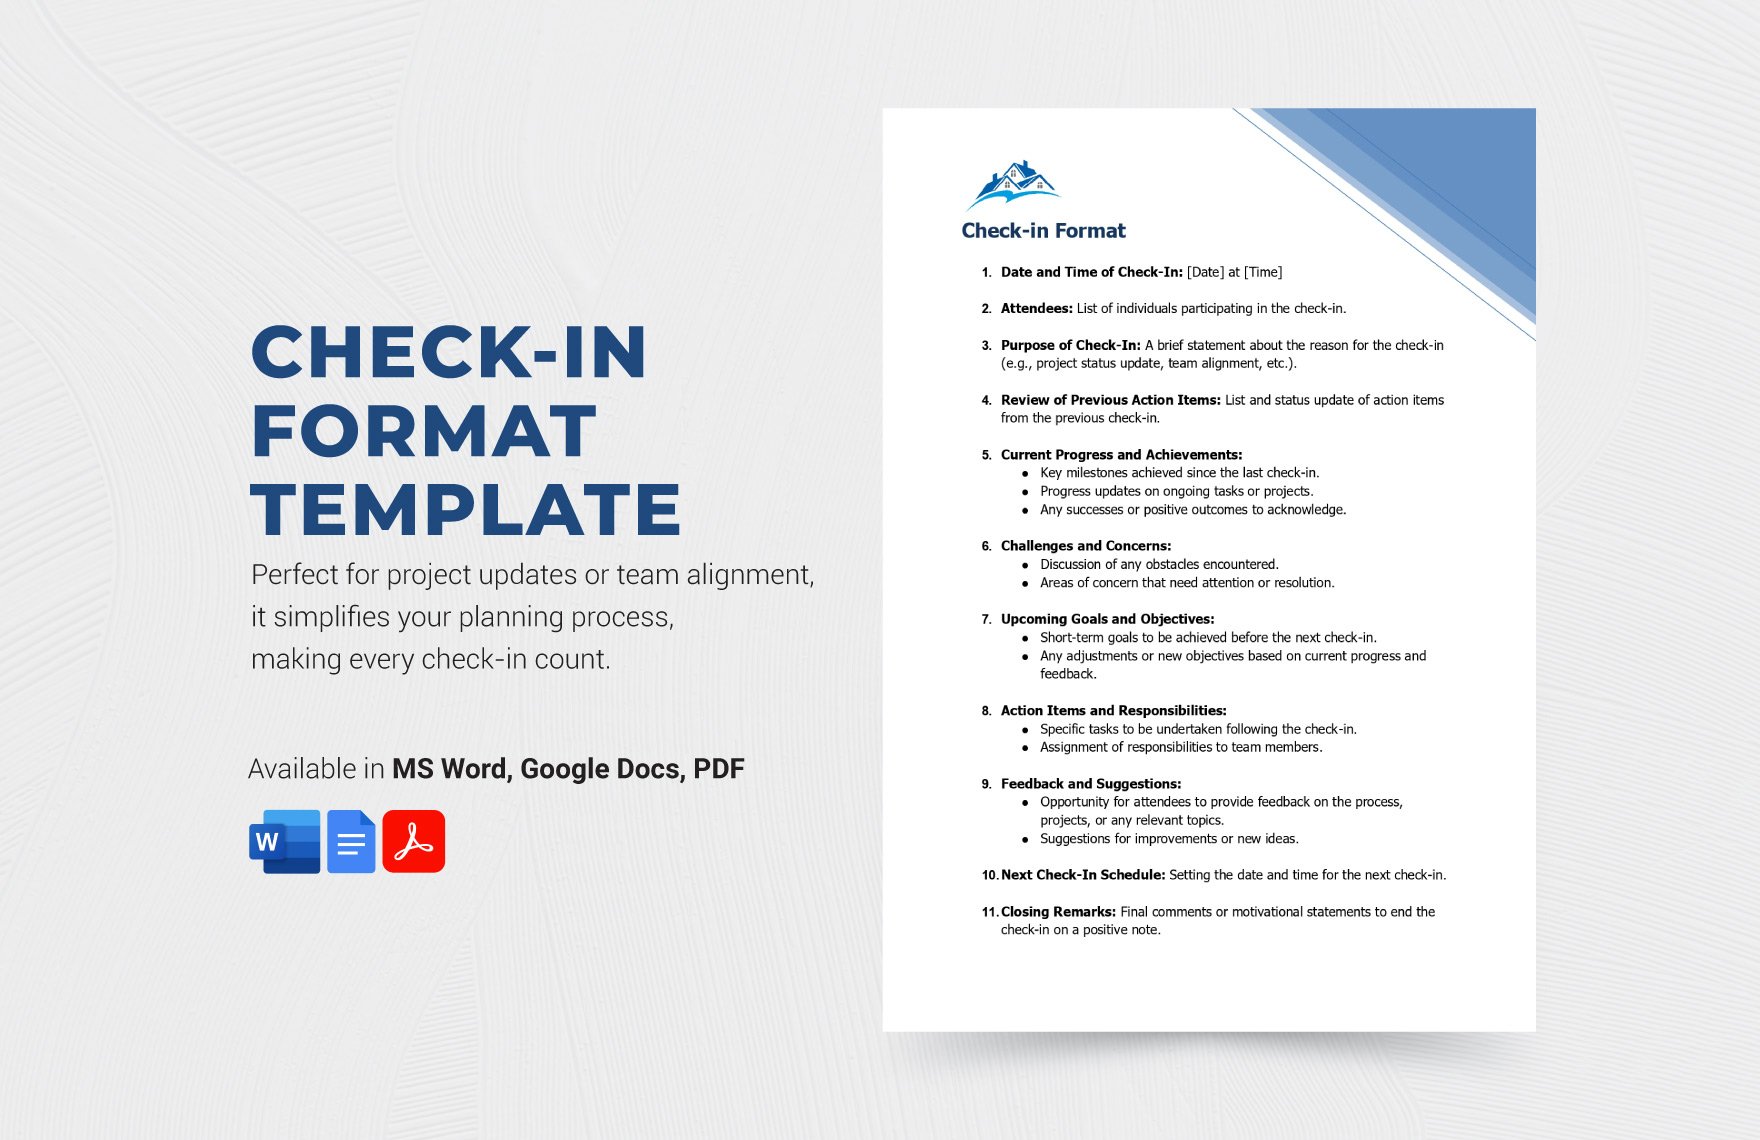 Free Check-in Format Template in Word, Google Docs, PDF